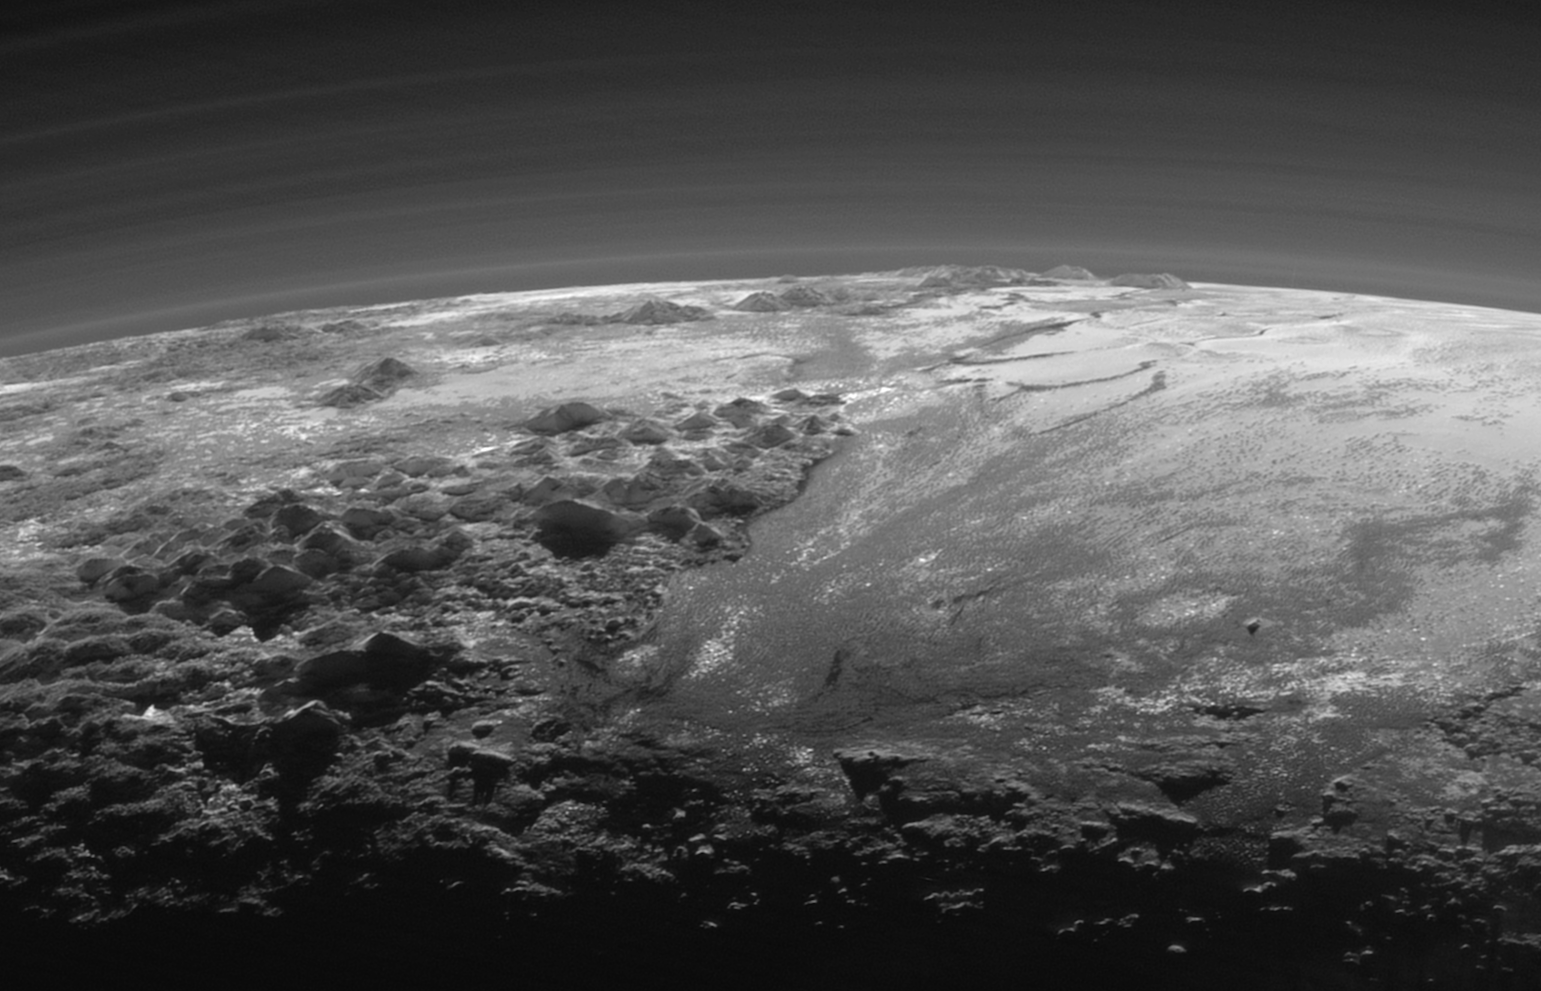 Perspective view of Pluto, showing the ice mountains and glacier-like plains, as well as haze layers in the atmosphere. Image Credit: NASA/JHUAPL/SwRI)